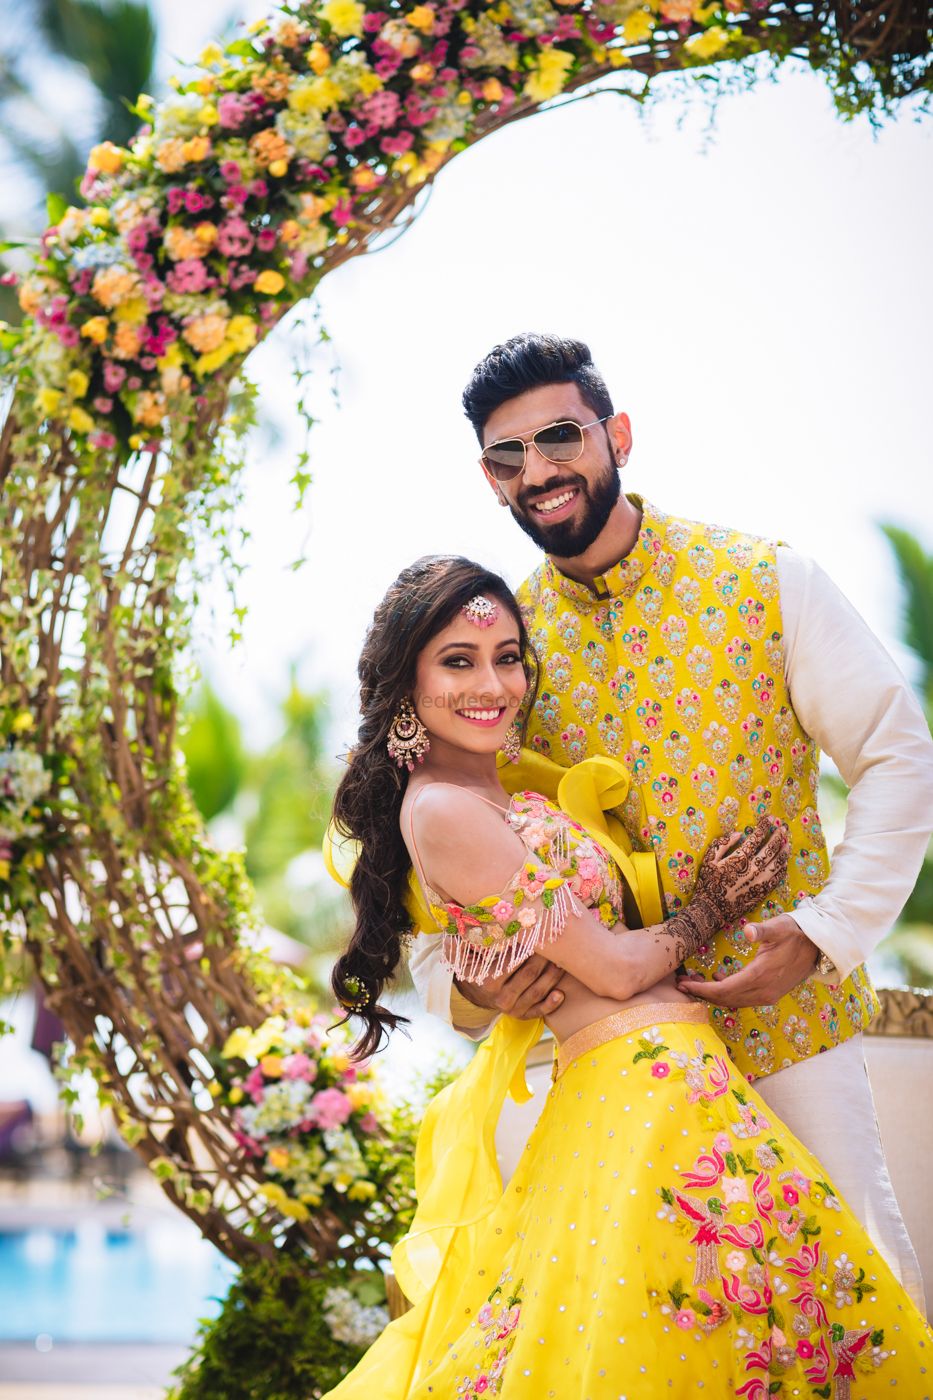 Photo of Mehendi bride and groom look in yellow outfits